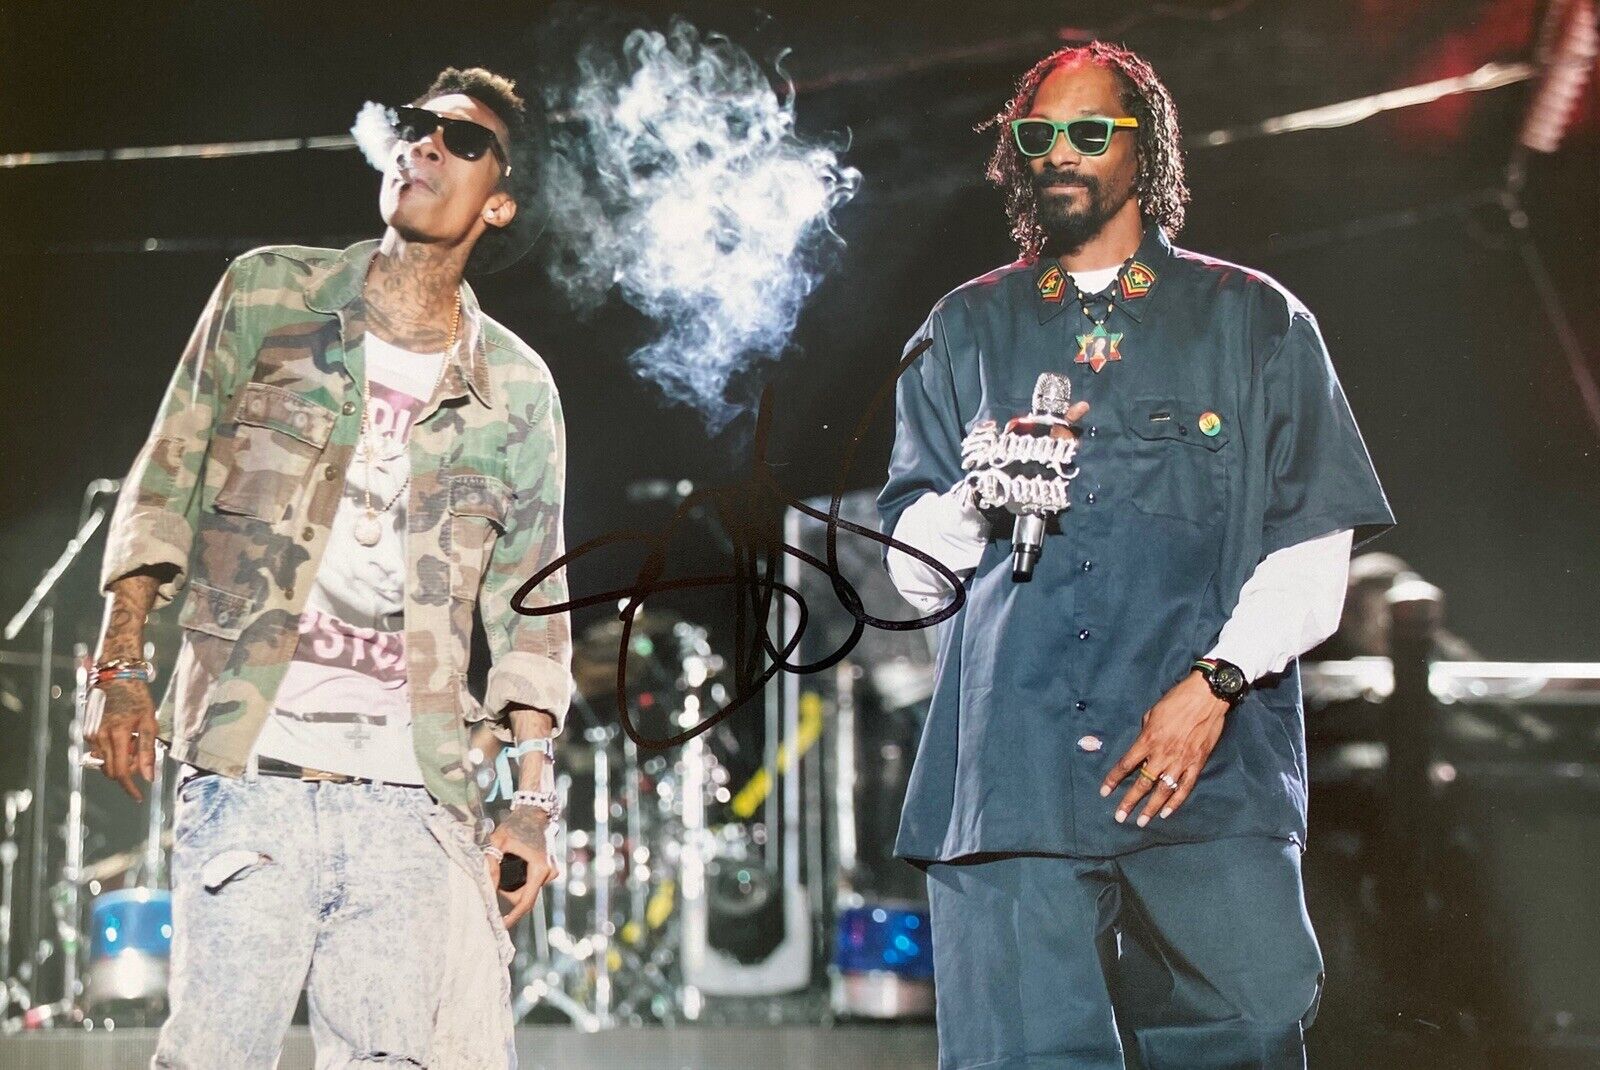 Snoop Dogg Genuine Hand Signed 12x8 Music Photo Poster painting, View Proof 2